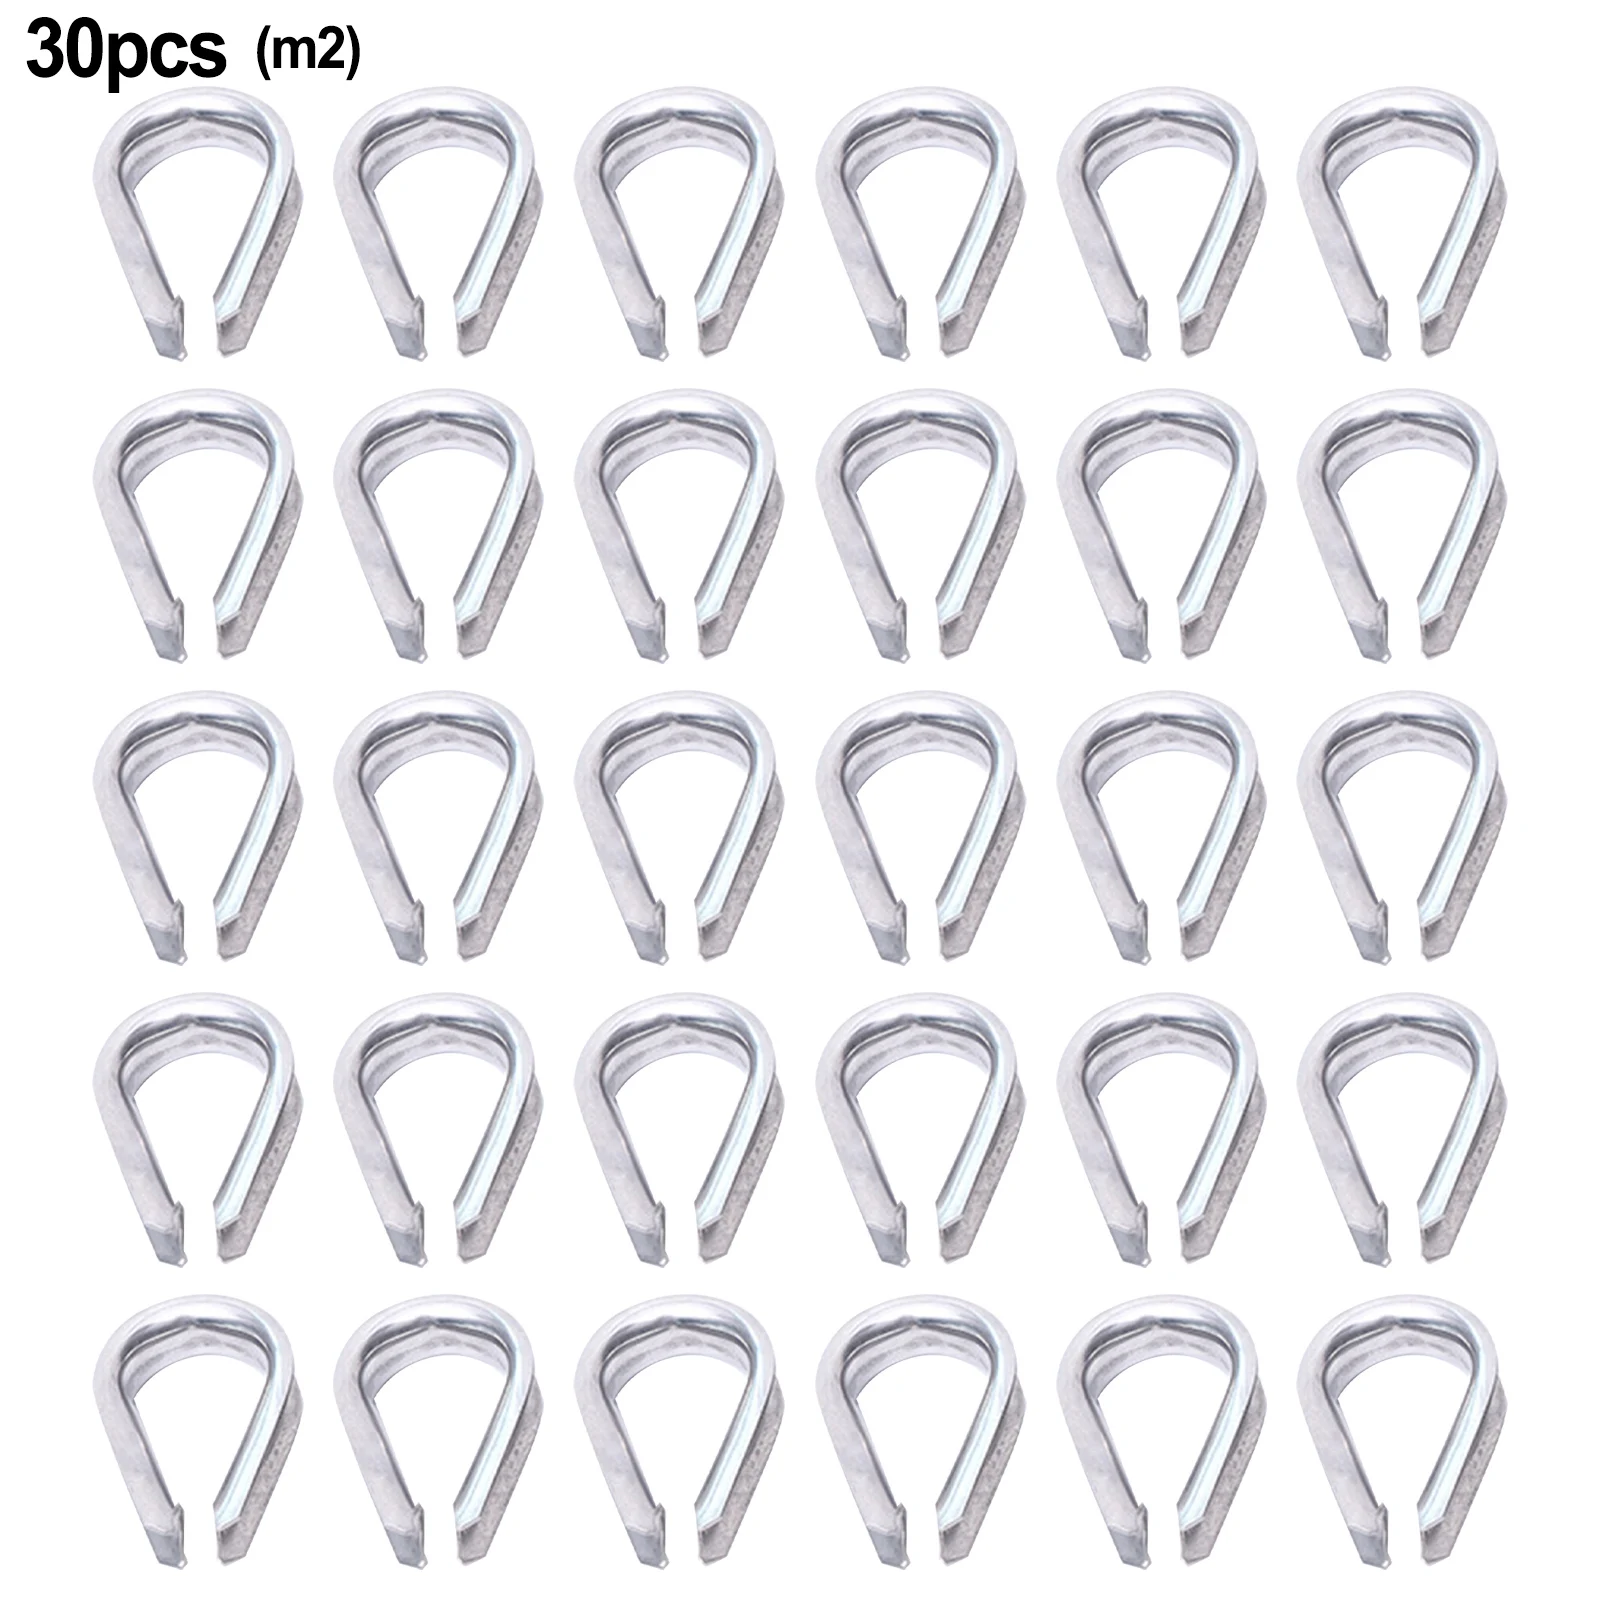 

Wide Applications Sturdy High Quality Wire Rope Clamps Tent Rope 304 Stainless Steel 30pcs Clothesline Hanging Flags